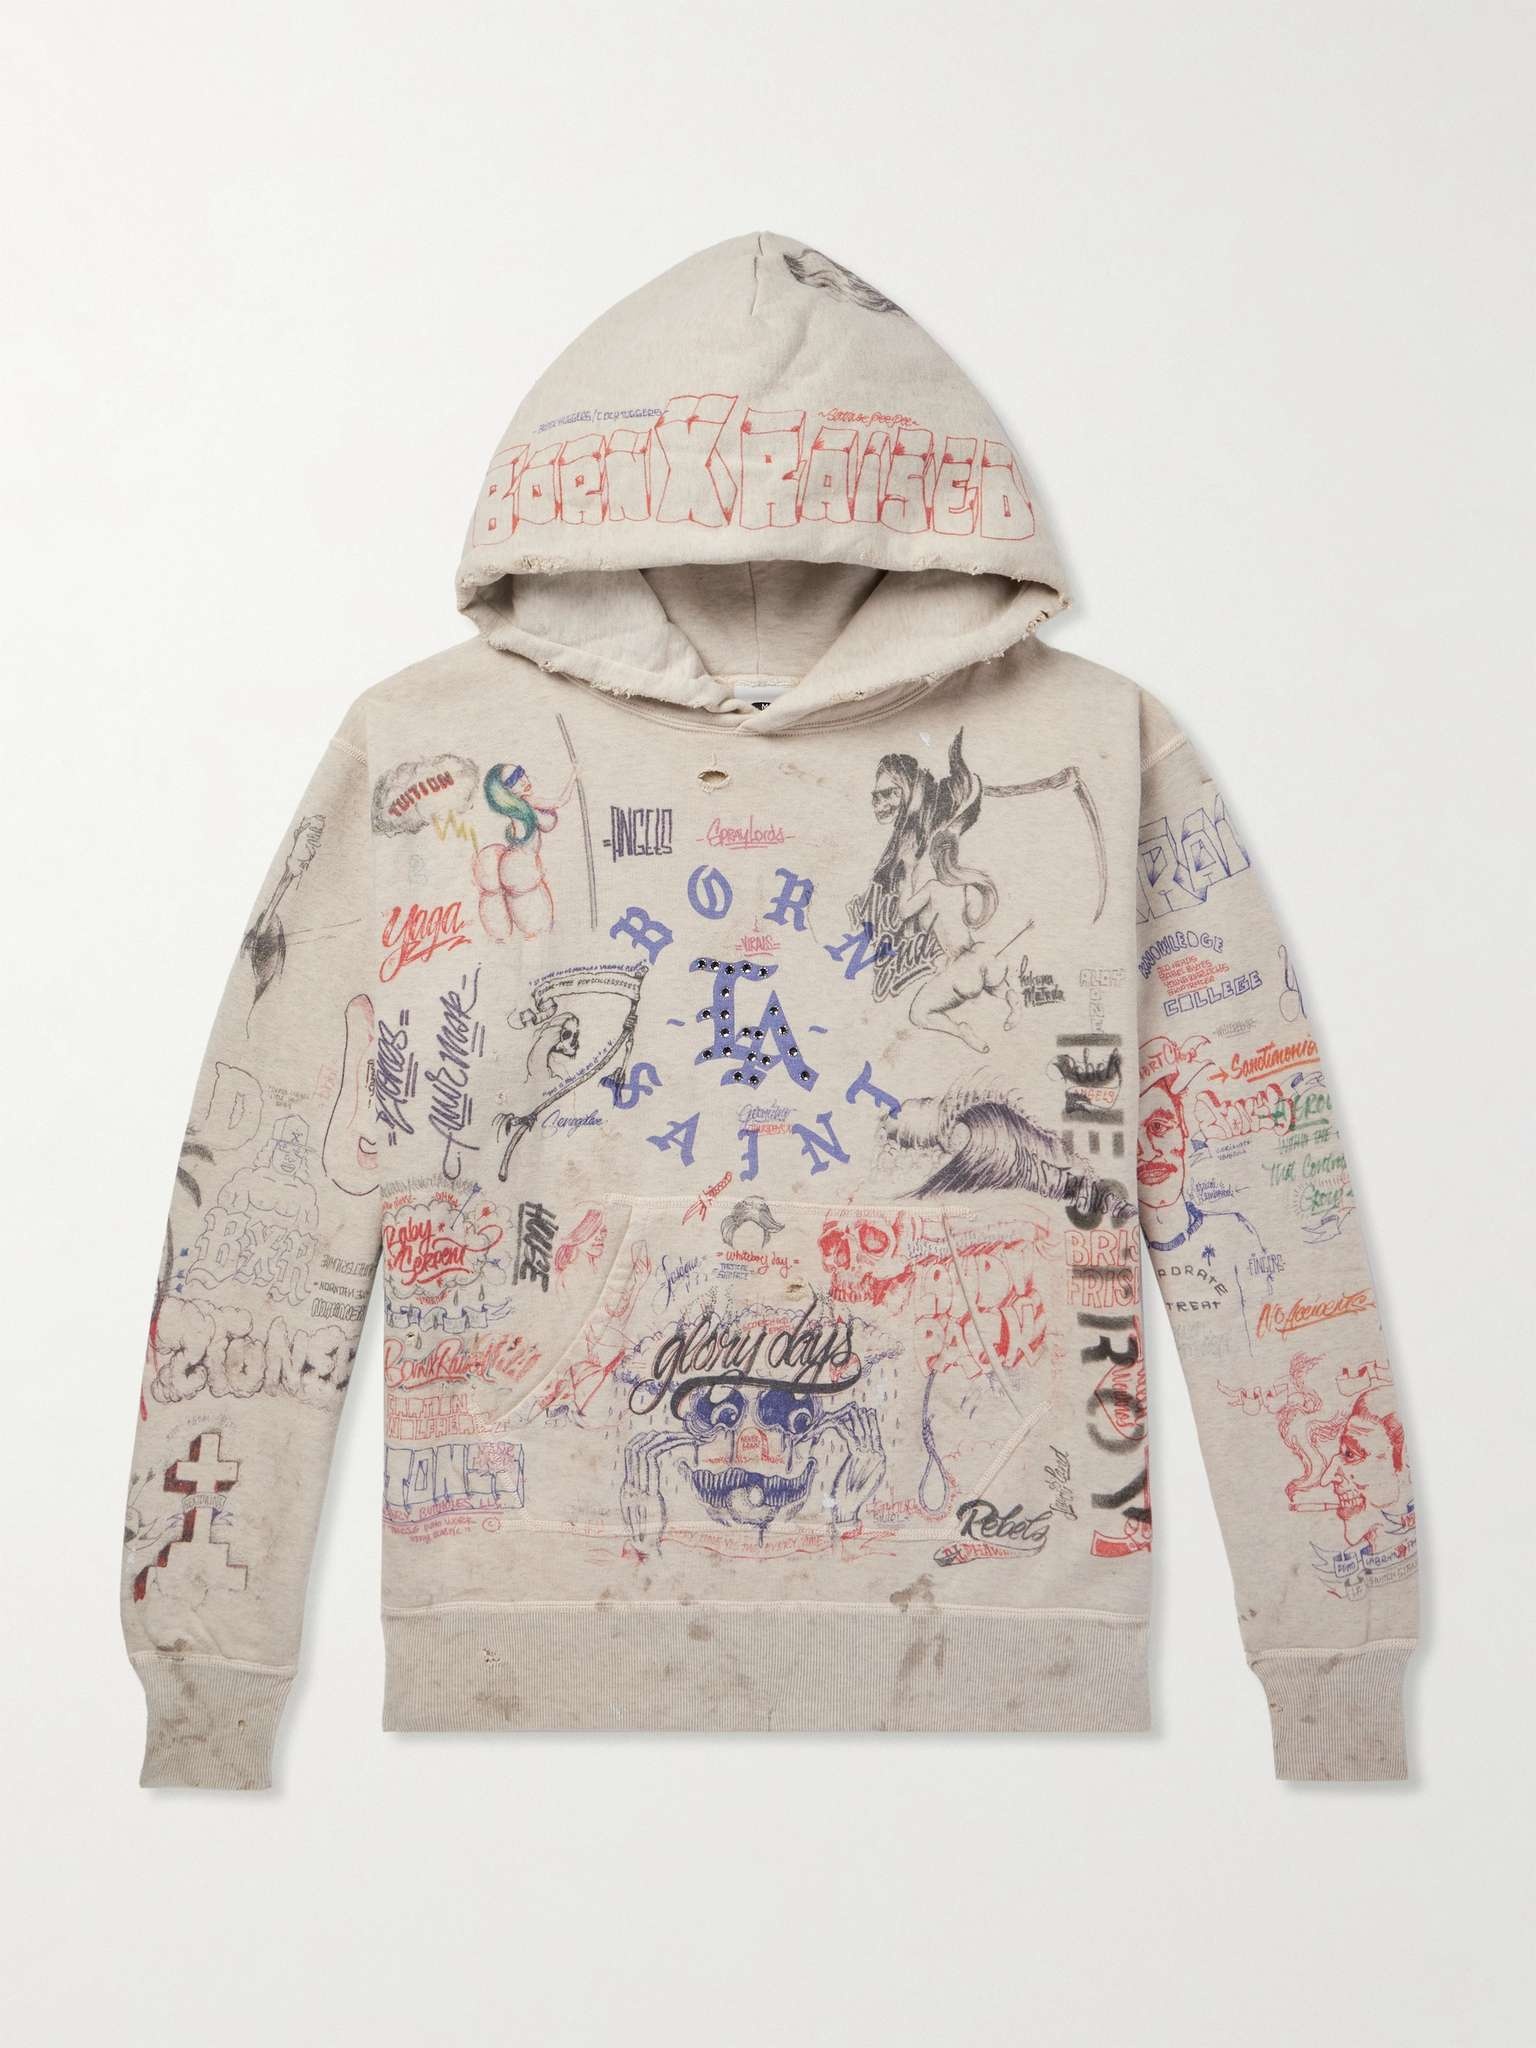 + Born X Raised Distressed Crystal-Embellished Printed Cotton-Jersey Hoodie - 1